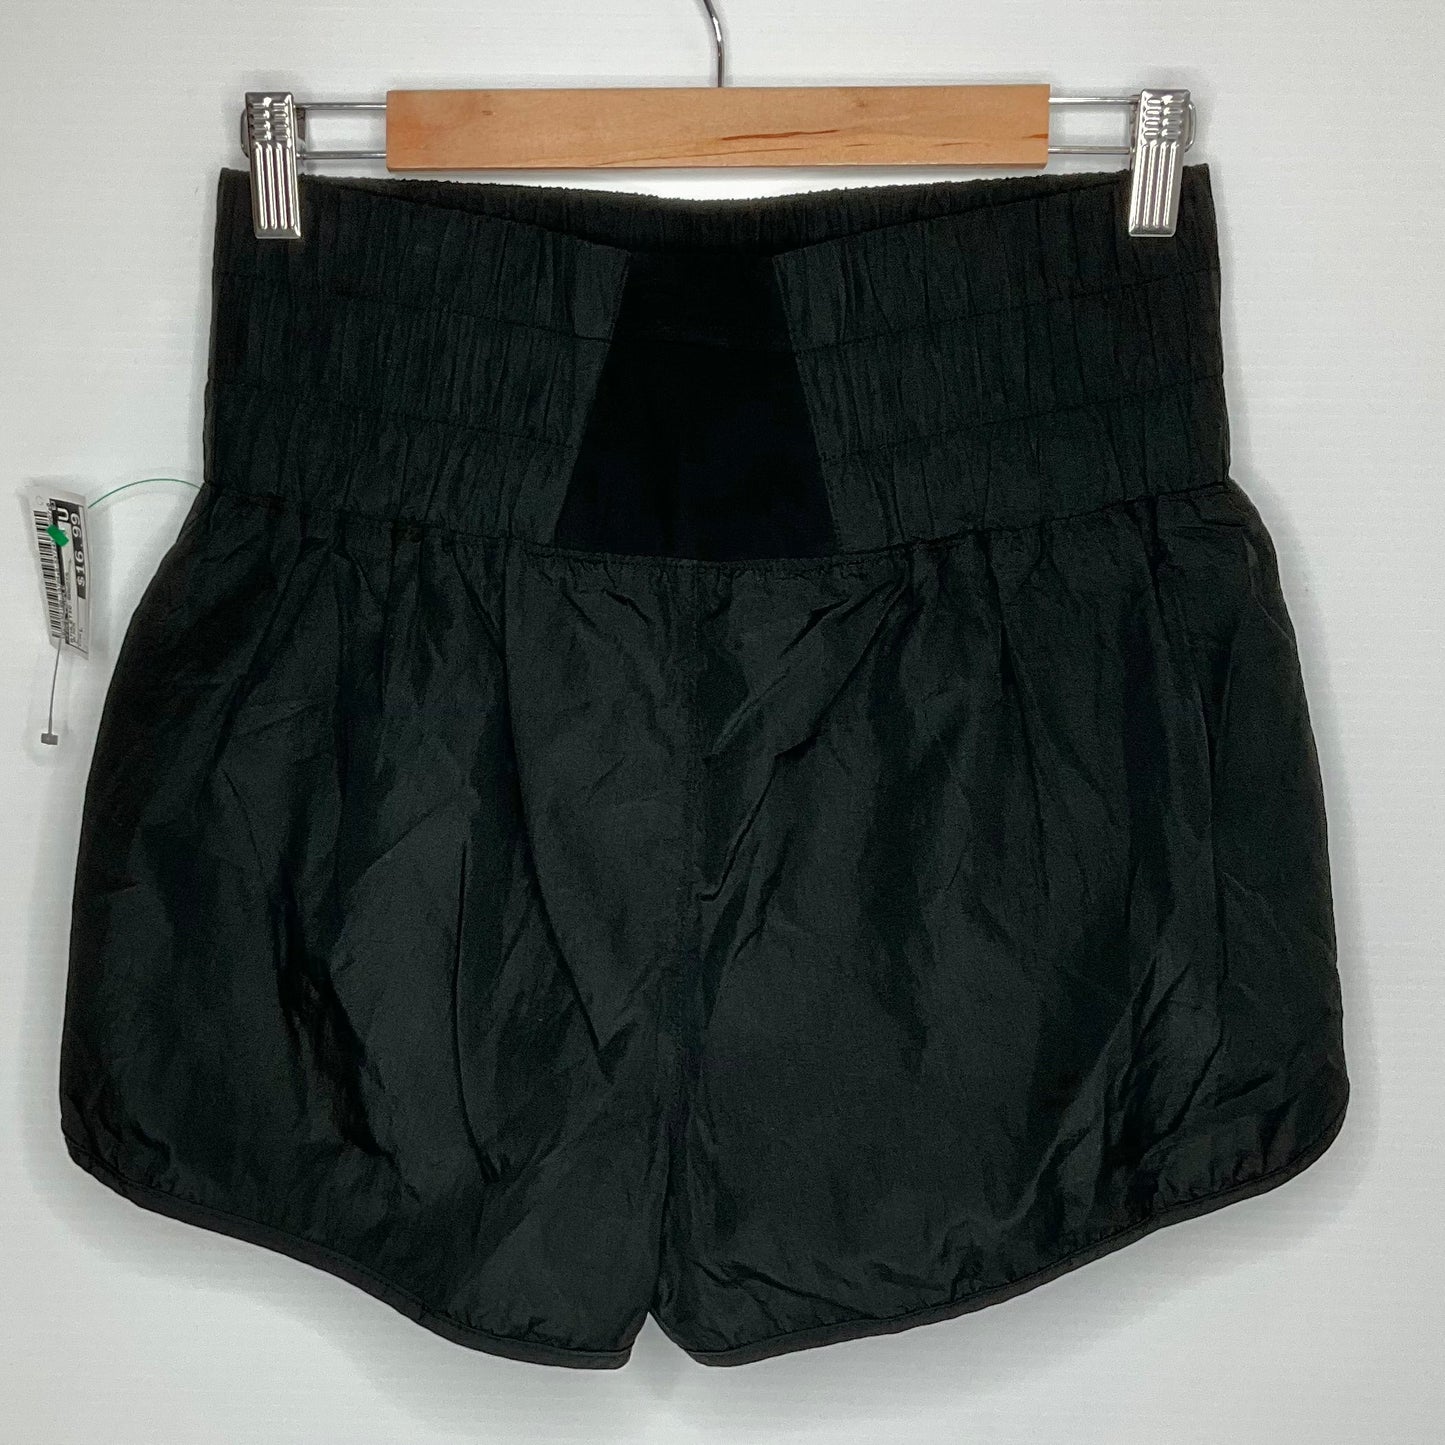 Black Athletic Shorts Free People, Size L